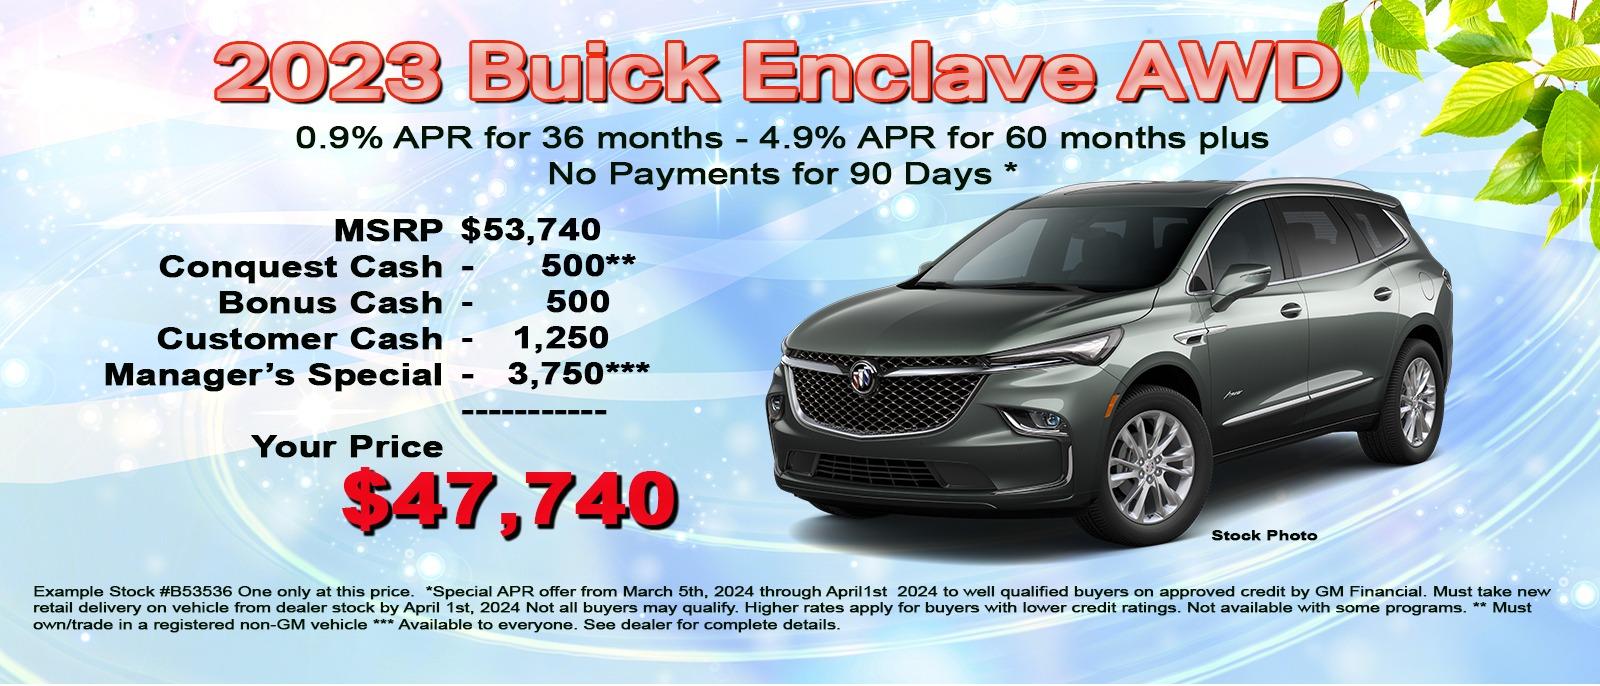 Save up to $6000 on your new Buick Enclave